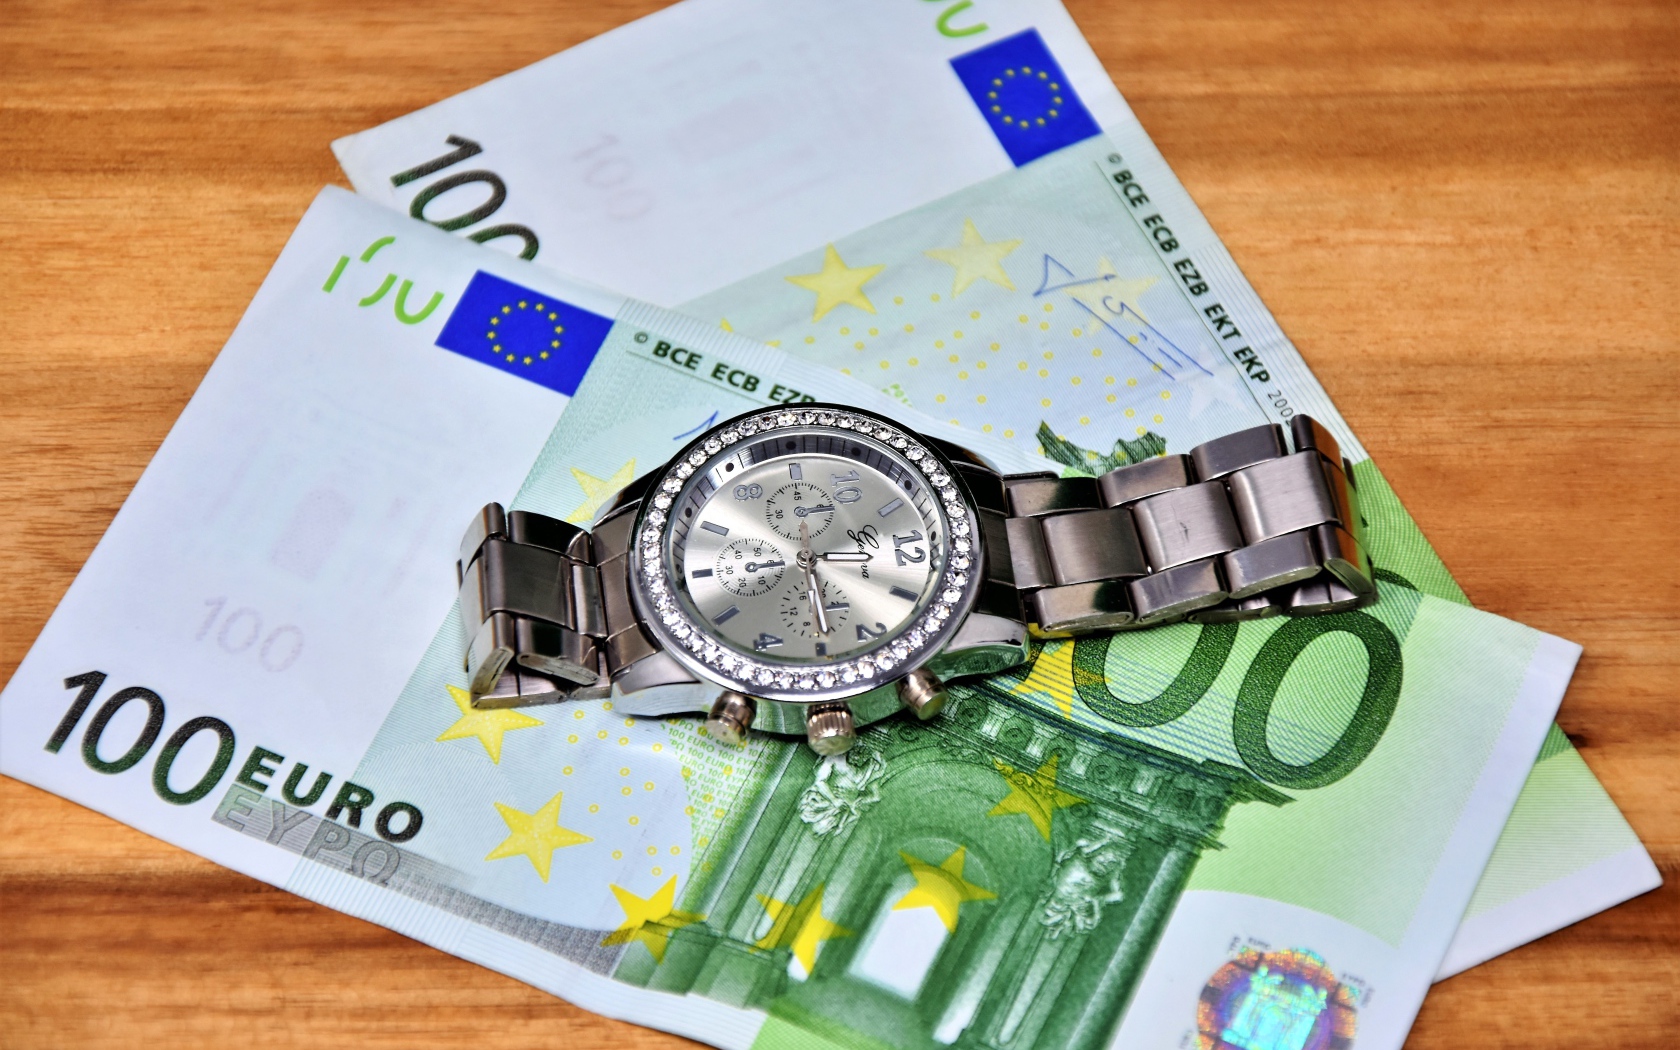 Two hundred euro bills with a clock on the table